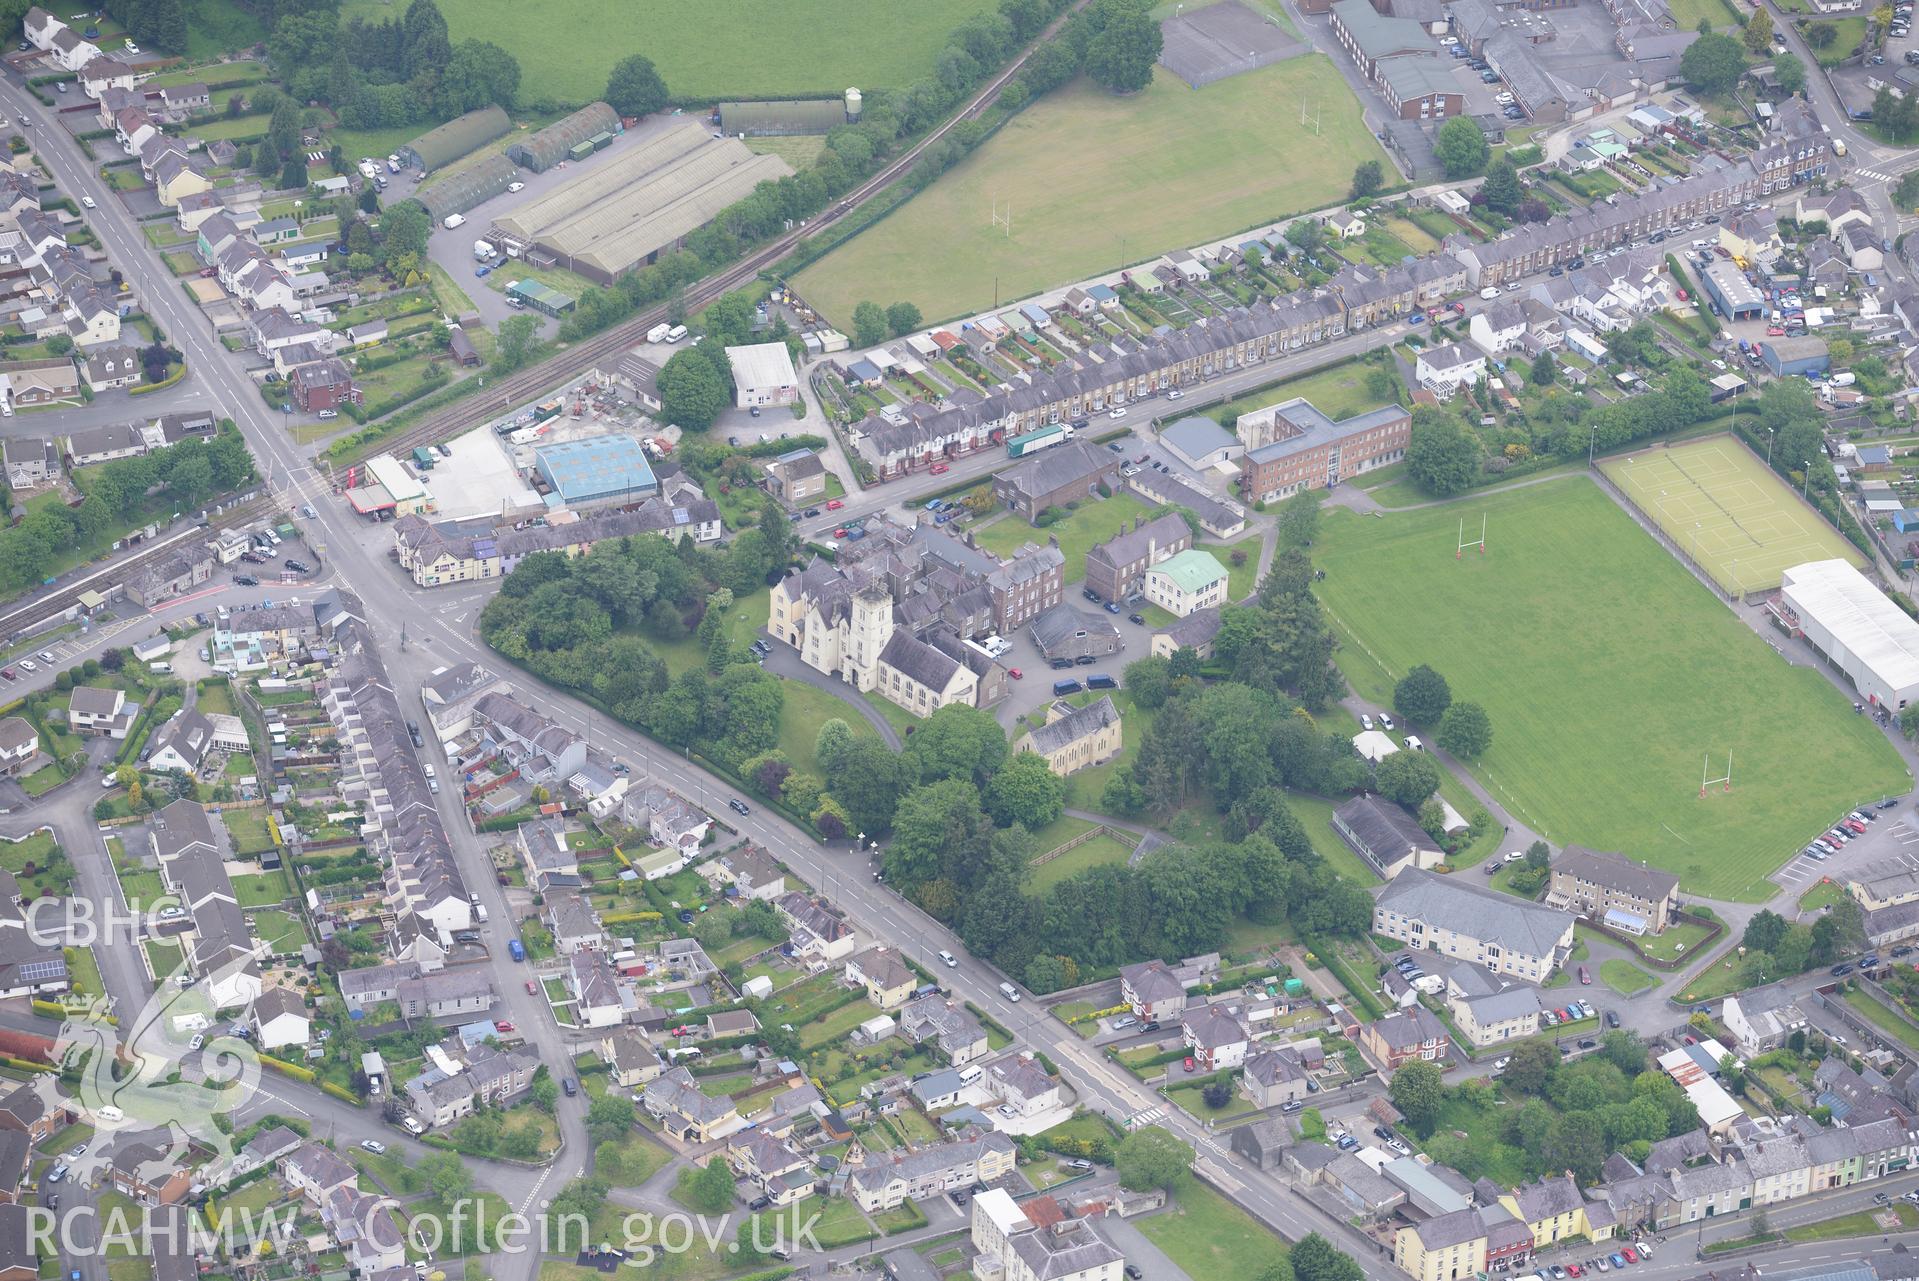 Llandovery college; railway station; Buffer Depot and Llandovery town. Oblique aerial photograph taken during the Royal Commission's programme of archaeological aerial reconnaissance by Toby Driver on 11th June 2015.